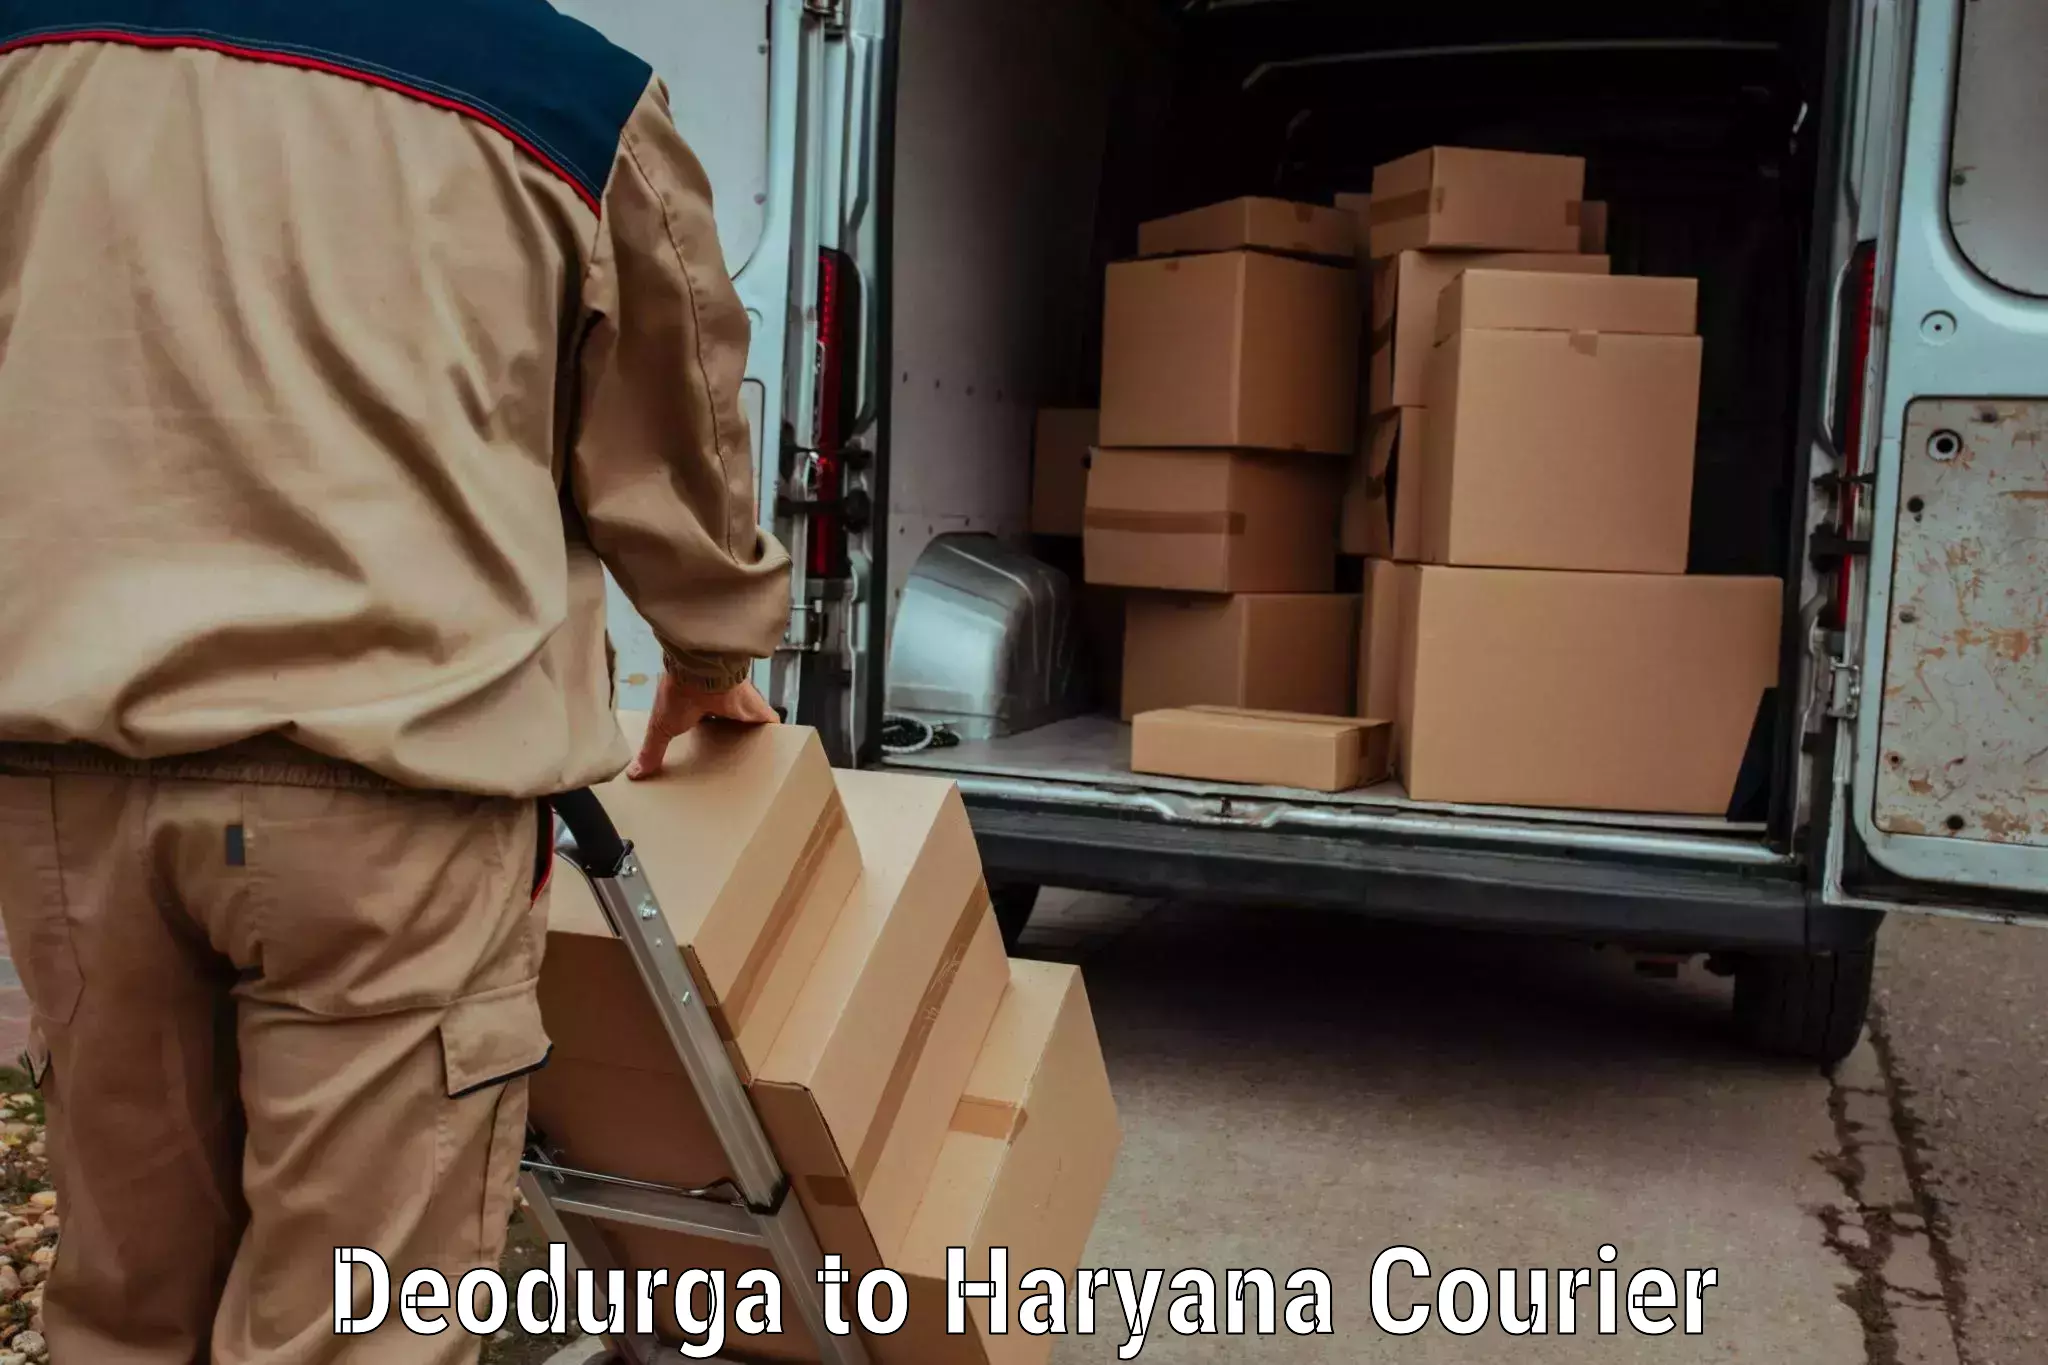 24-hour delivery options Deodurga to Fatehabad